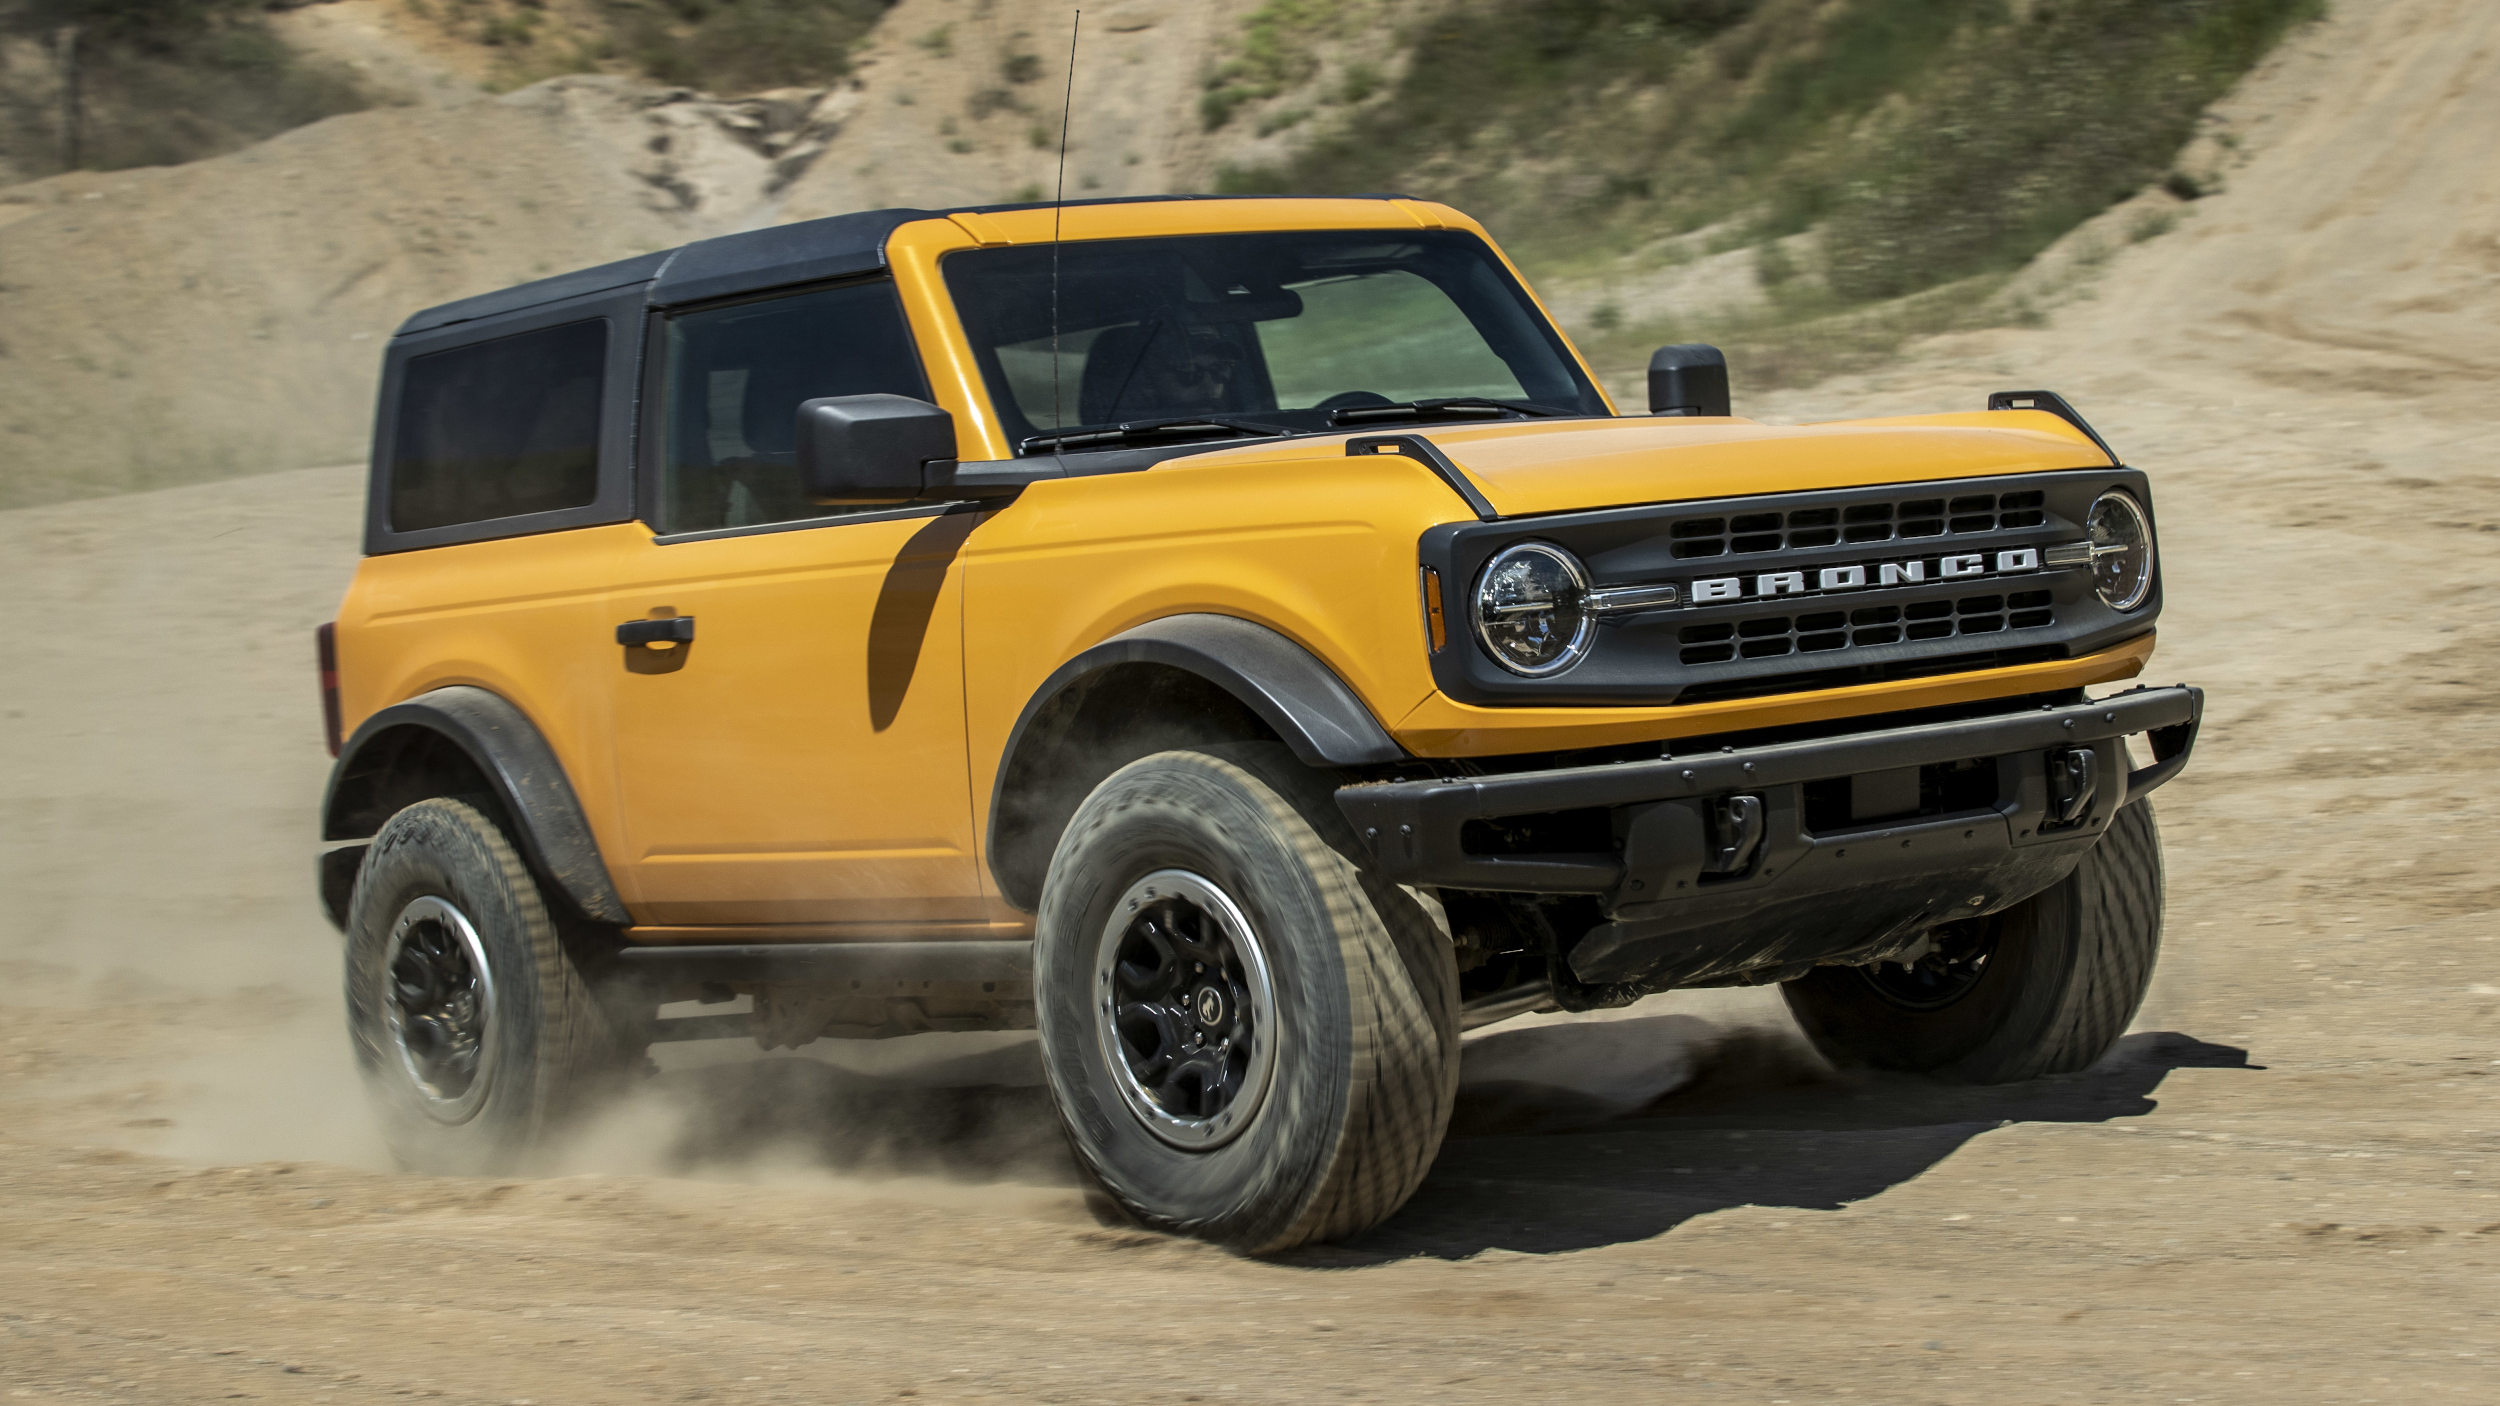 Is Ford considering bringing the new Bronco to the Philippines?